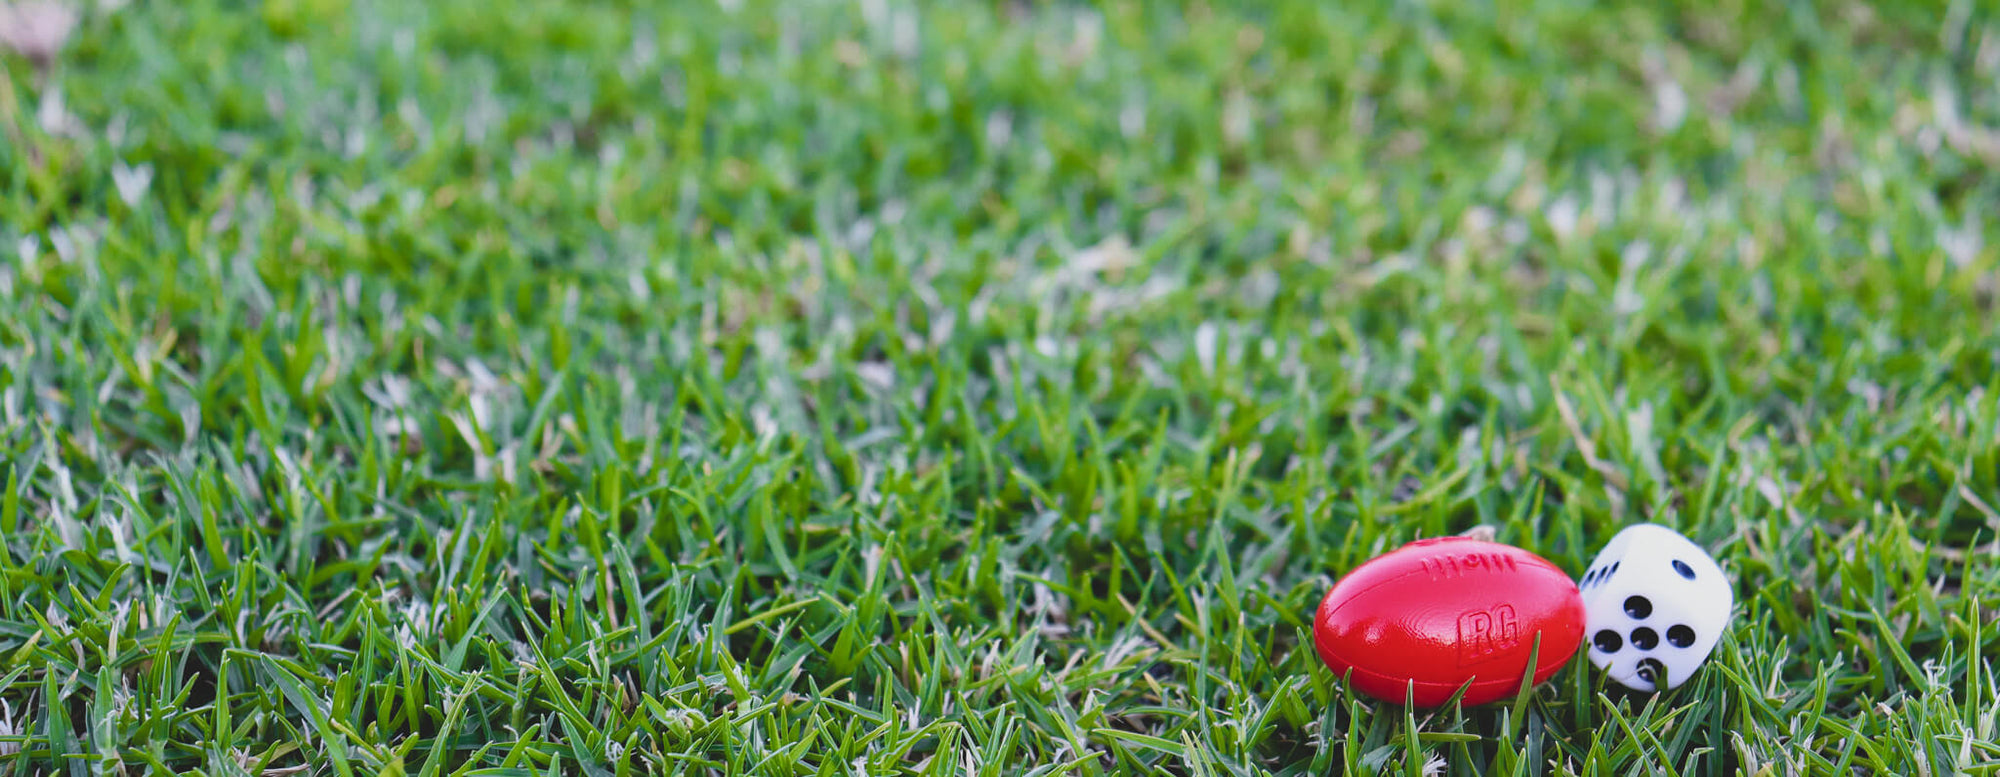 Mad for Footy dice and football counter resting on grass.